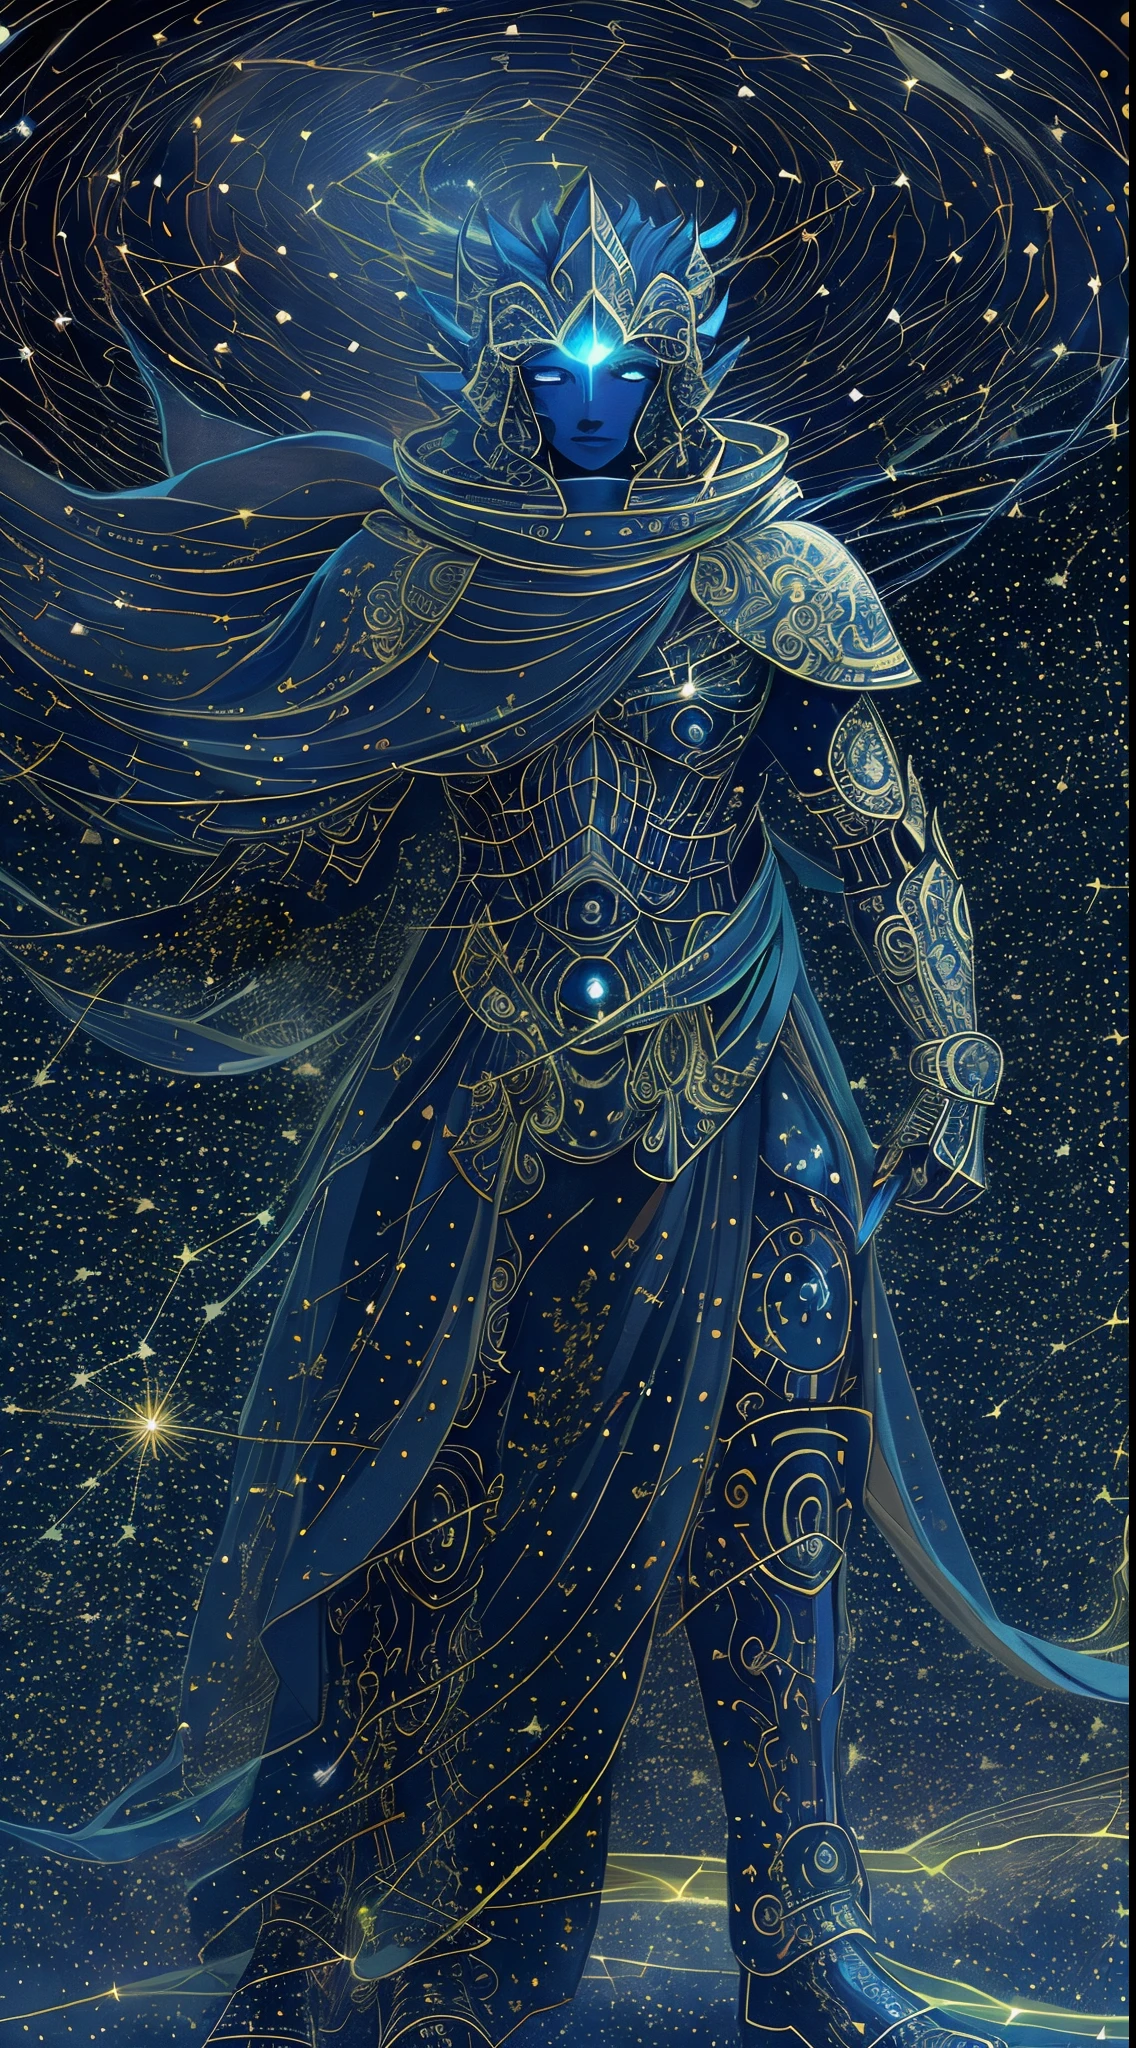 [1] A solitary warrior in midnight-blue armor, full-body pose, facing a cosmic abyss, eyes reflecting distant galaxies; [2] Armor embedded with constellations, emitting a soft astral glow; [3] Celestial battleground floating in space, cosmic storms and stellar explosions; [4] A surreal atmosphere of cosmic warfare, a sense of solitude amidst the vastness of the universe; [5] Illustration; [6] Digital art with emphasis on cosmic details and luminosity,